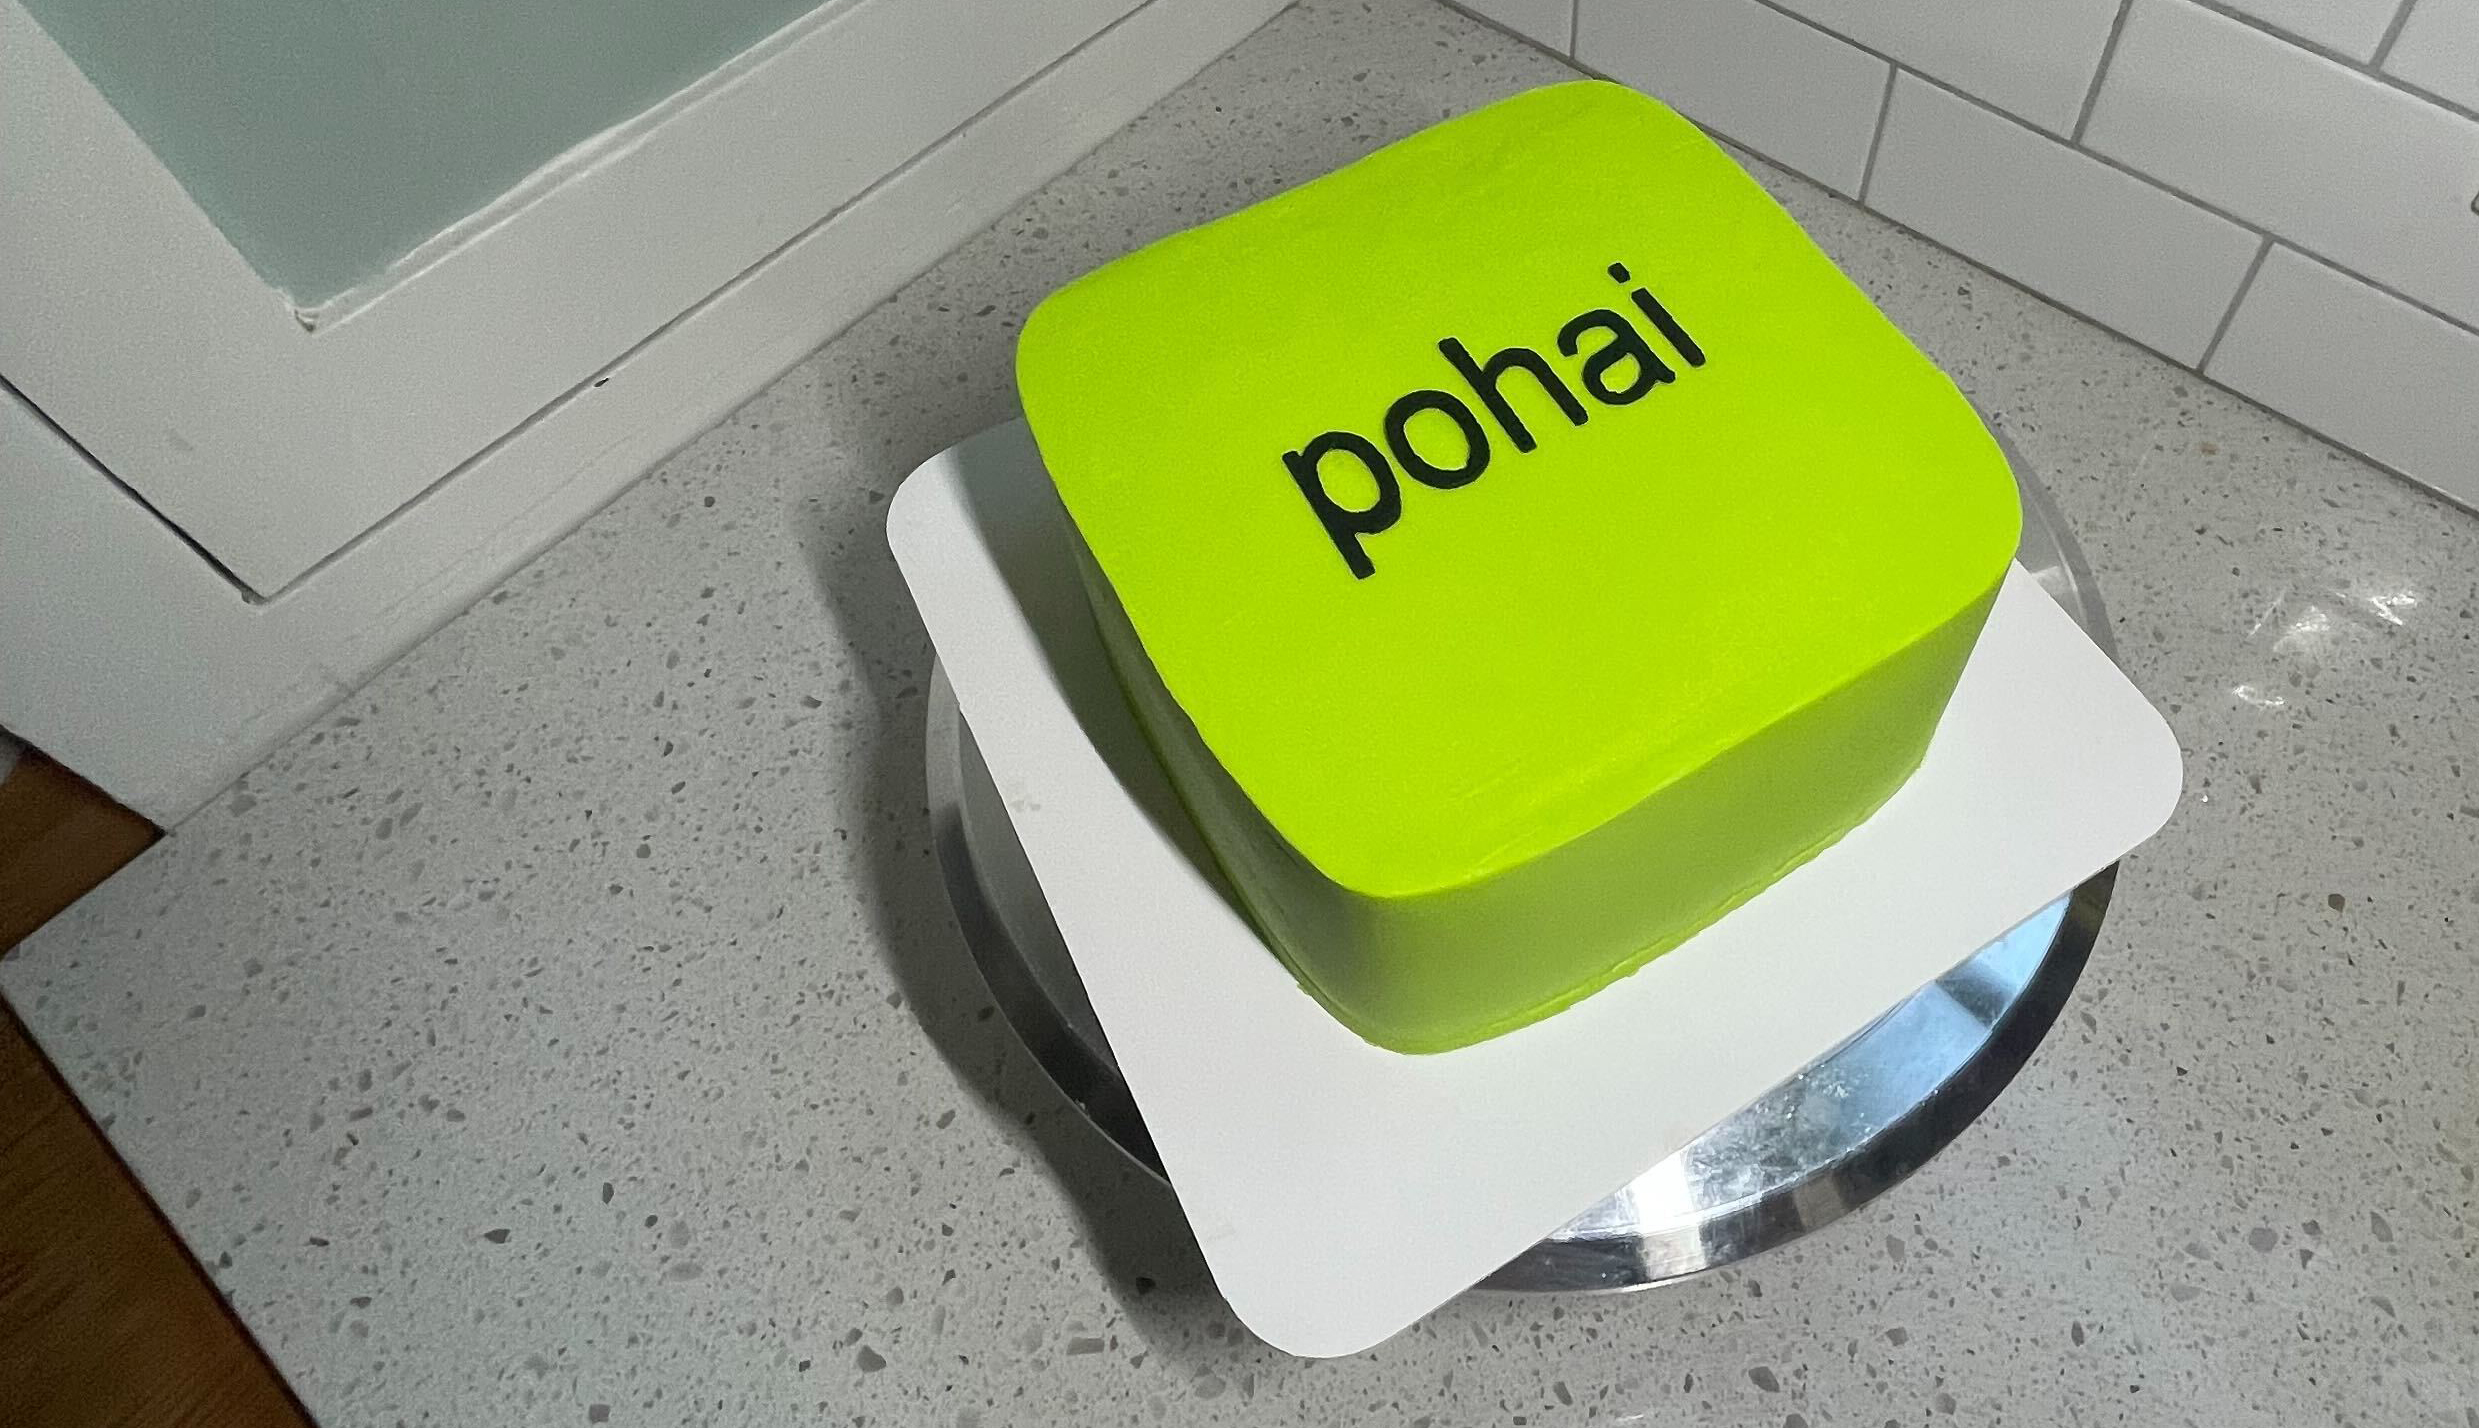 A bright green cake with the name Pohai on it in black lettering